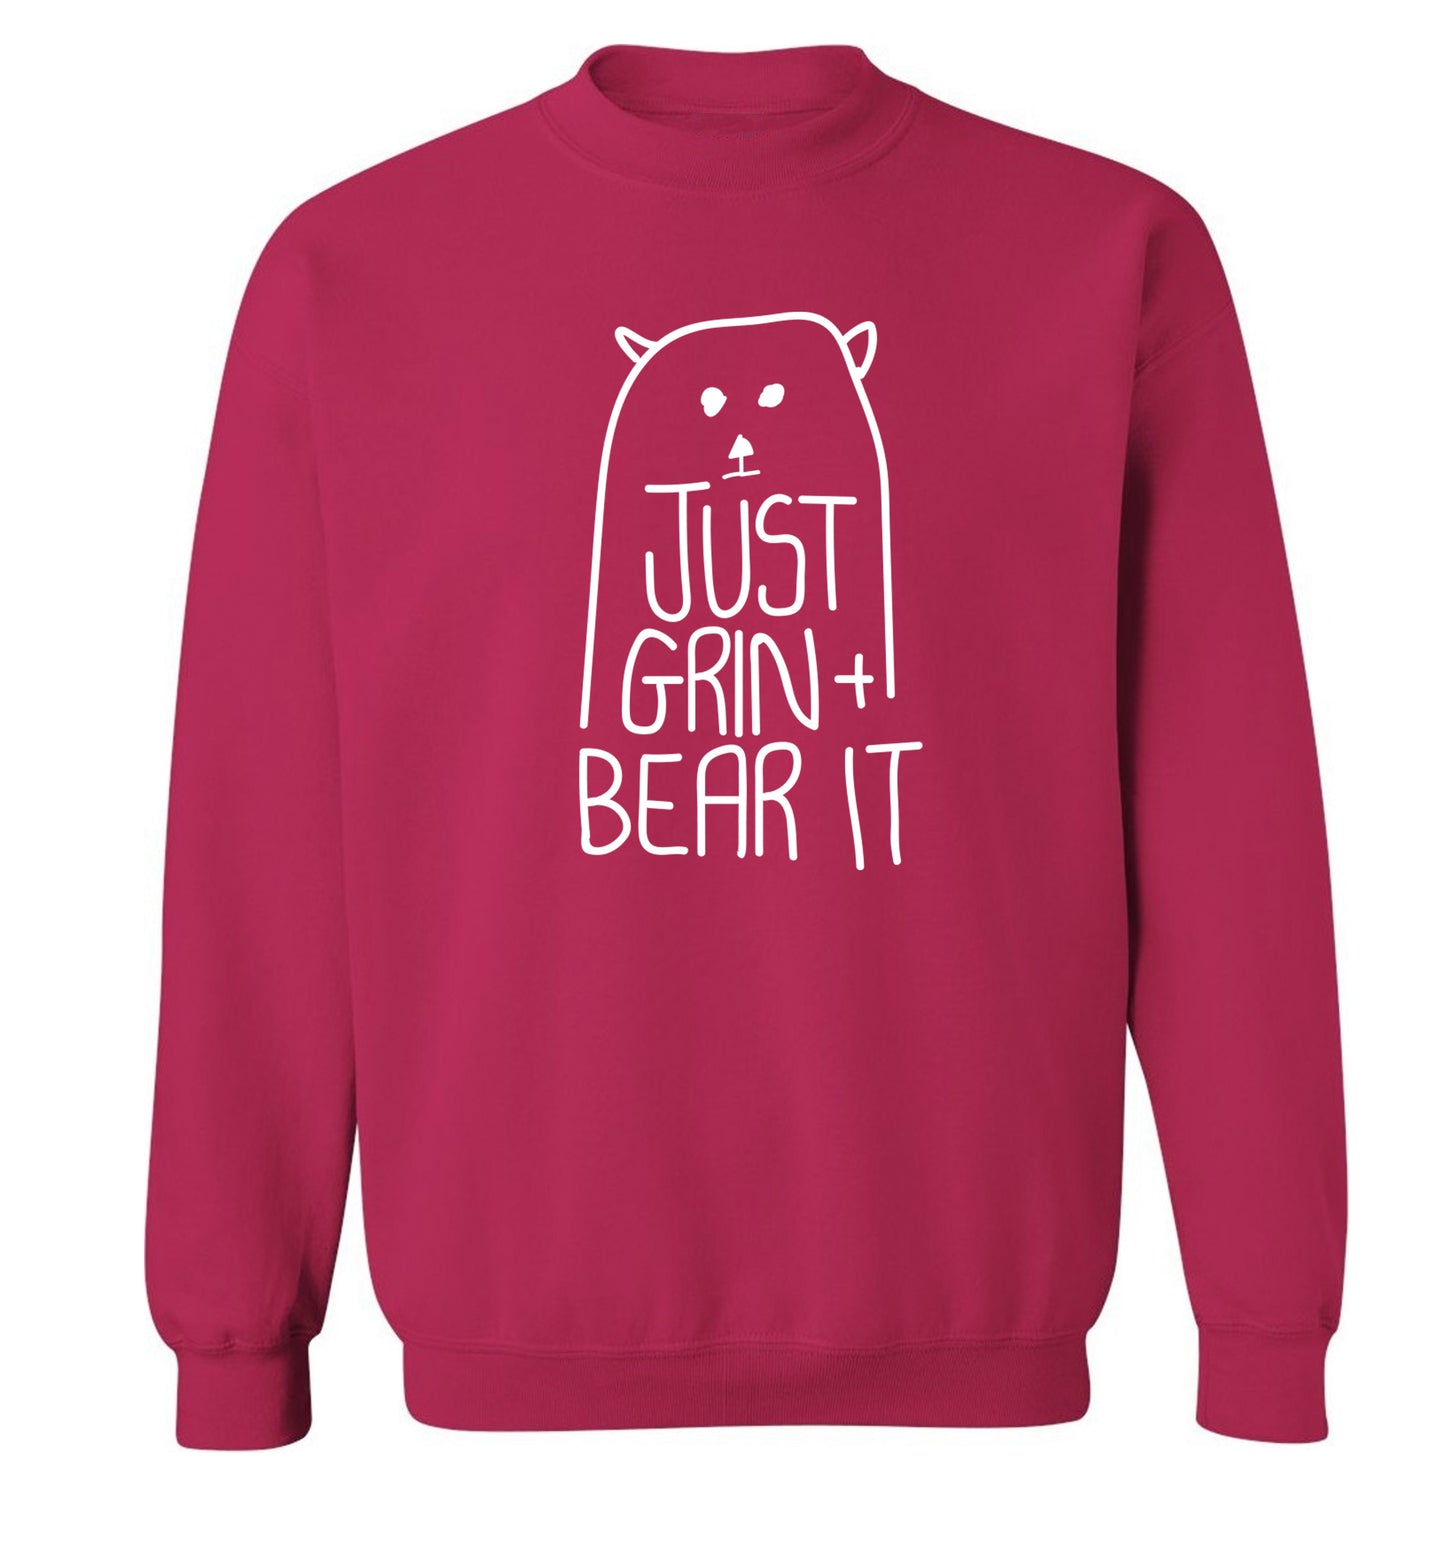 Just grin and bear it Adult's unisex pink Sweater 2XL